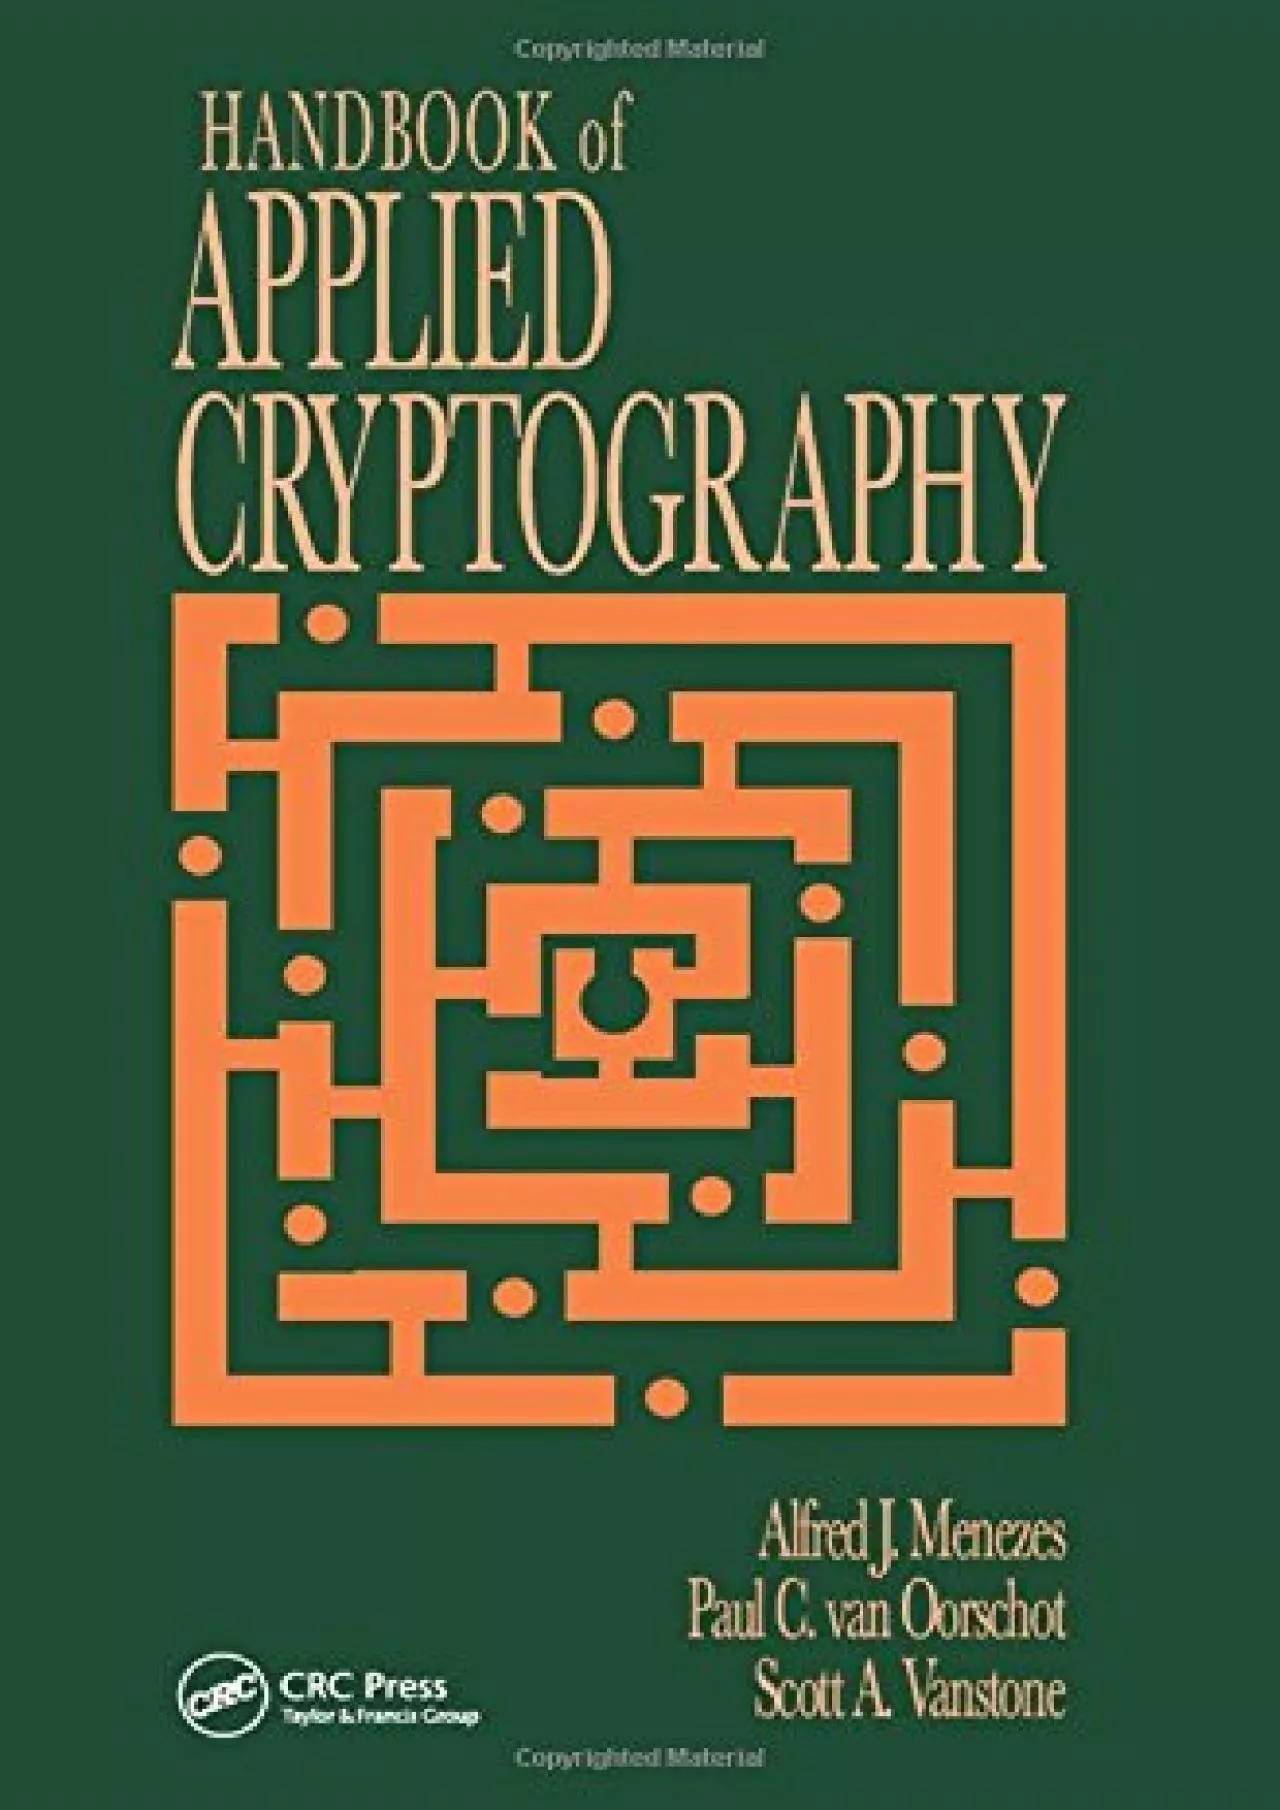 (BOOK)-Handbook of Applied Cryptography (Discrete Mathematics and Its Applications)